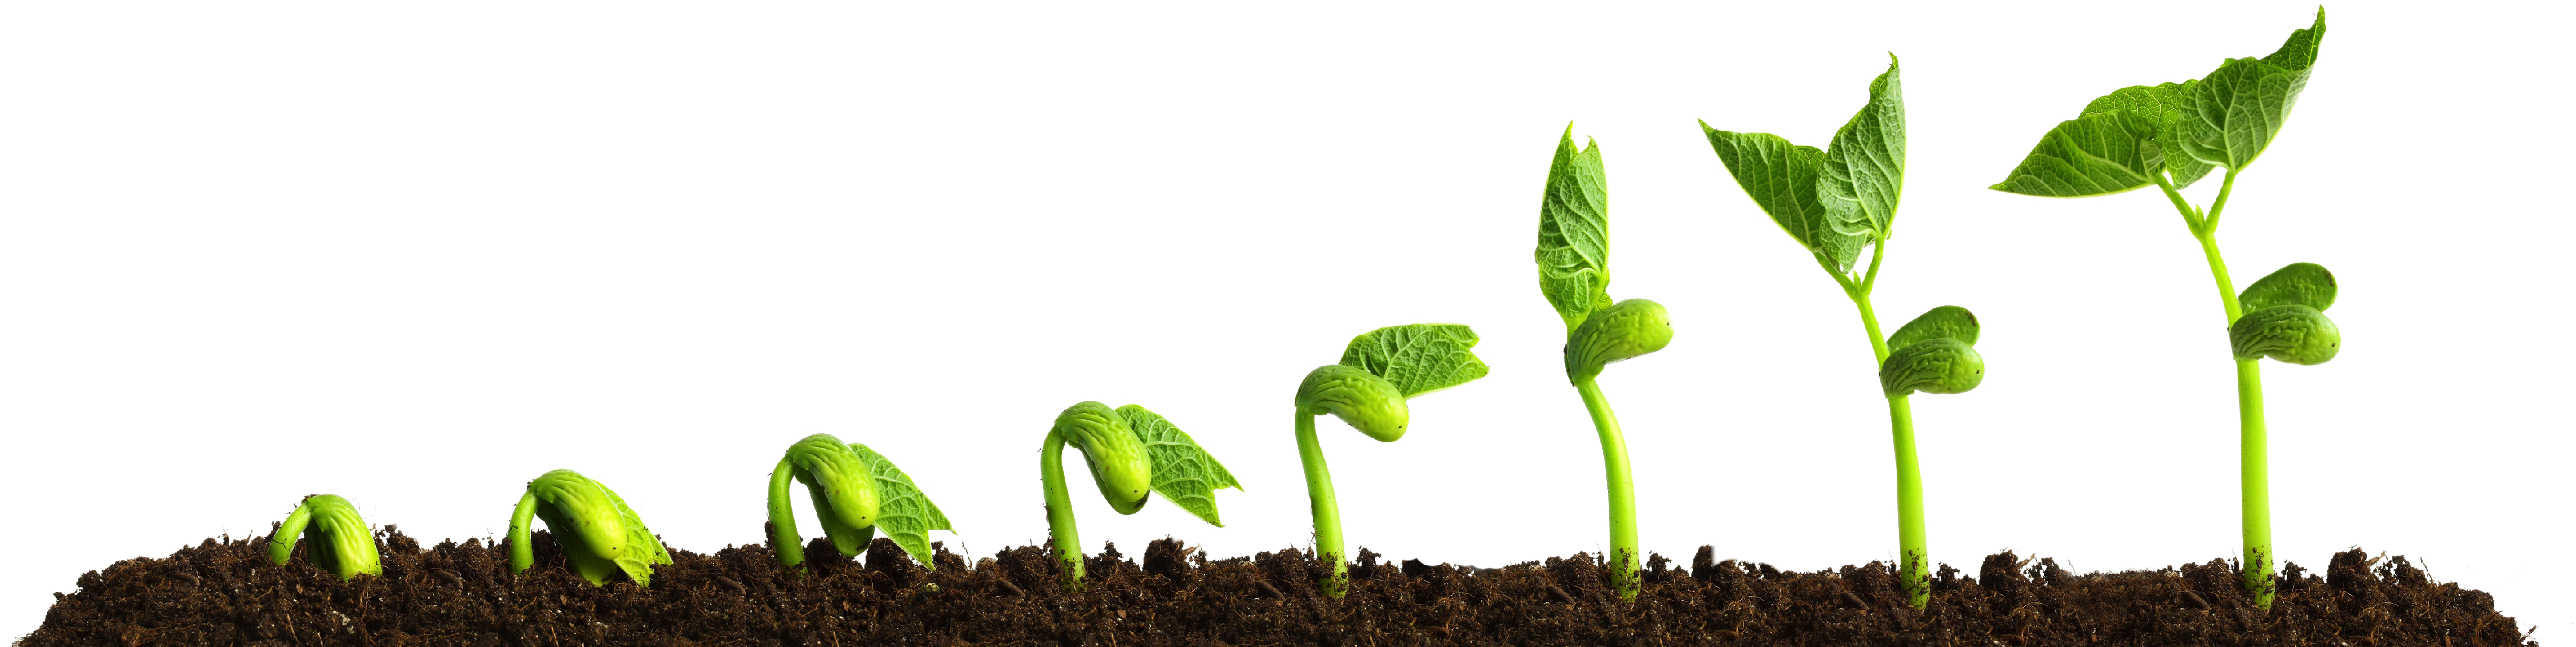 View Grow Clipart Images - Alade